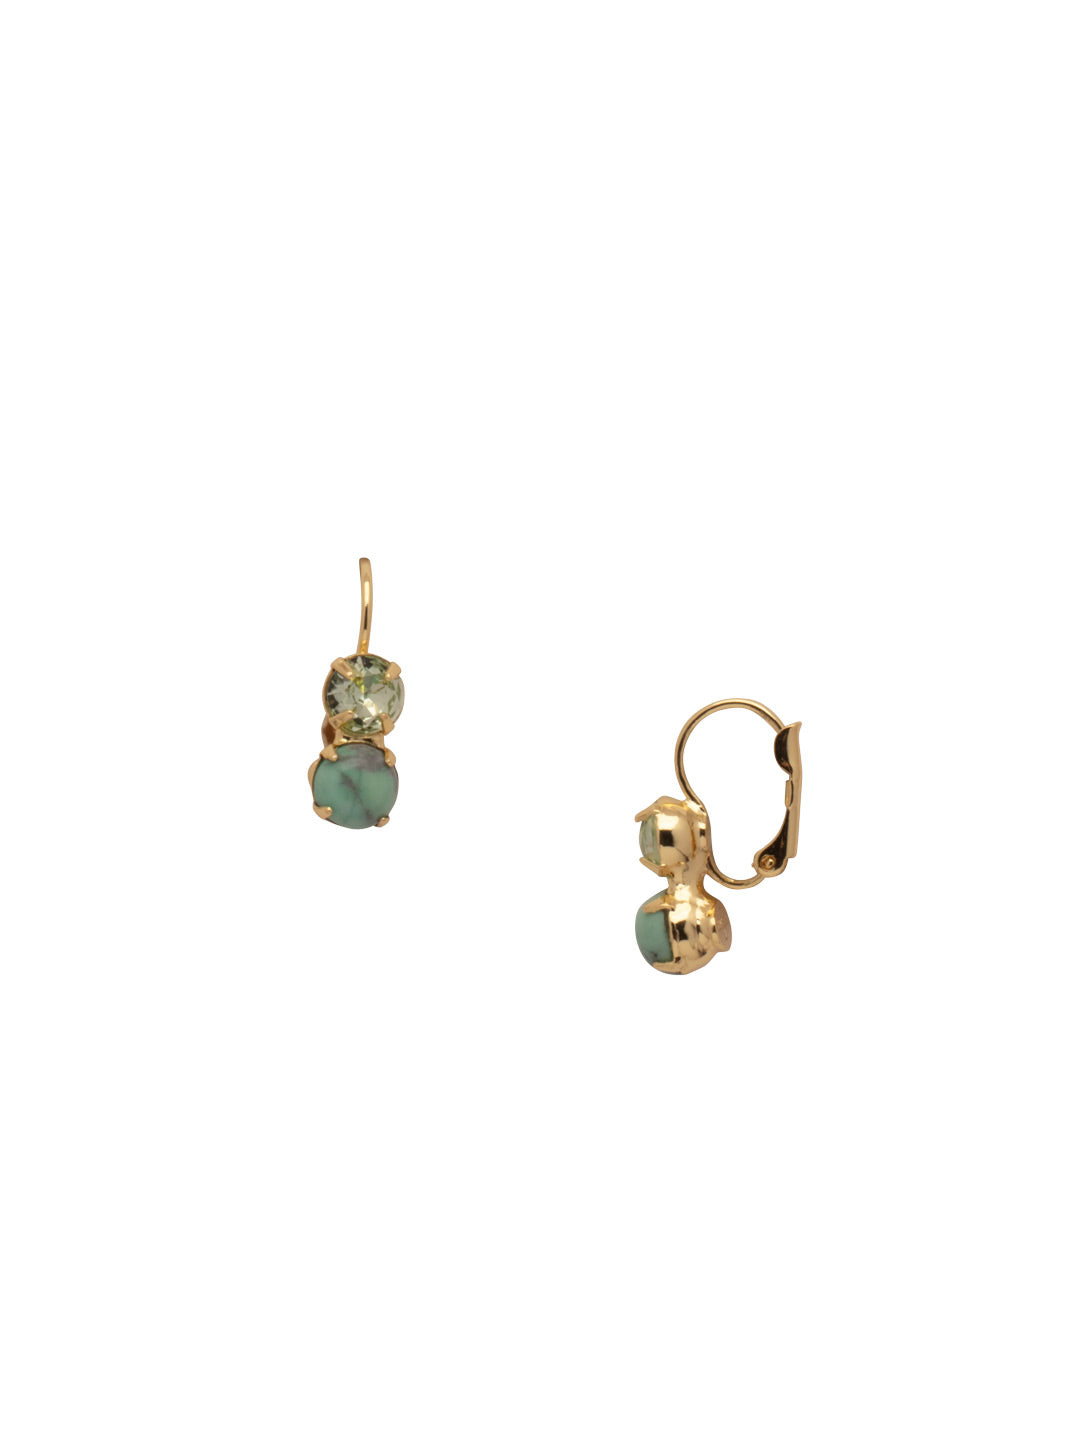 Xena Classic Dangle Earrings - EFF11BGSGR - <p>The Xena Classic Dangle Earrings feature two small round cut crystals and semi-precious stones dangling from a lever back French wire. From Sorrelli's Sage Green collection in our Bright Gold-tone finish.</p>